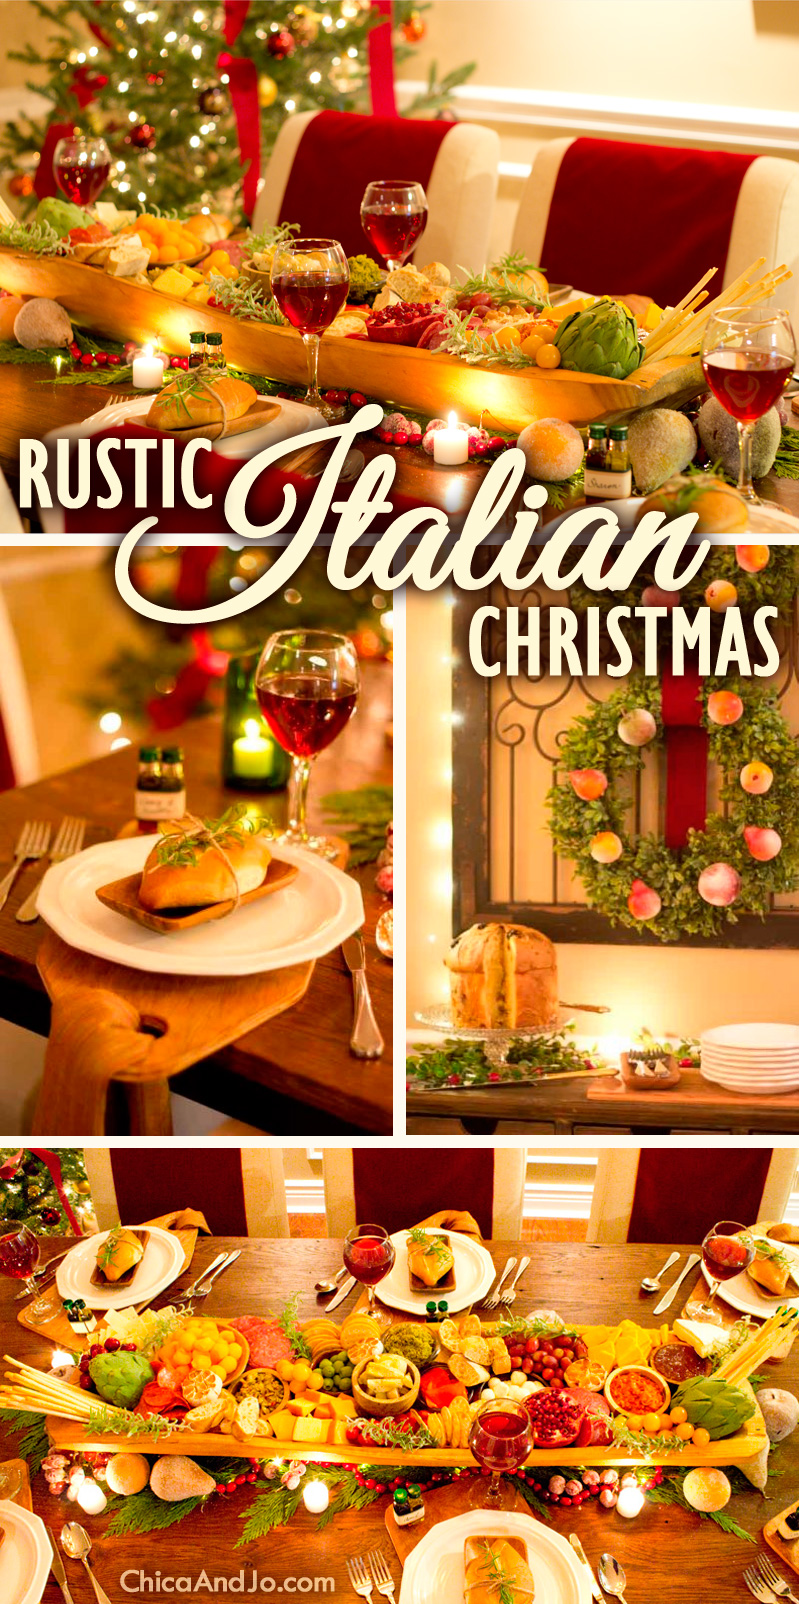 Rustic Italian Christmas table decorations | Chica and Jo